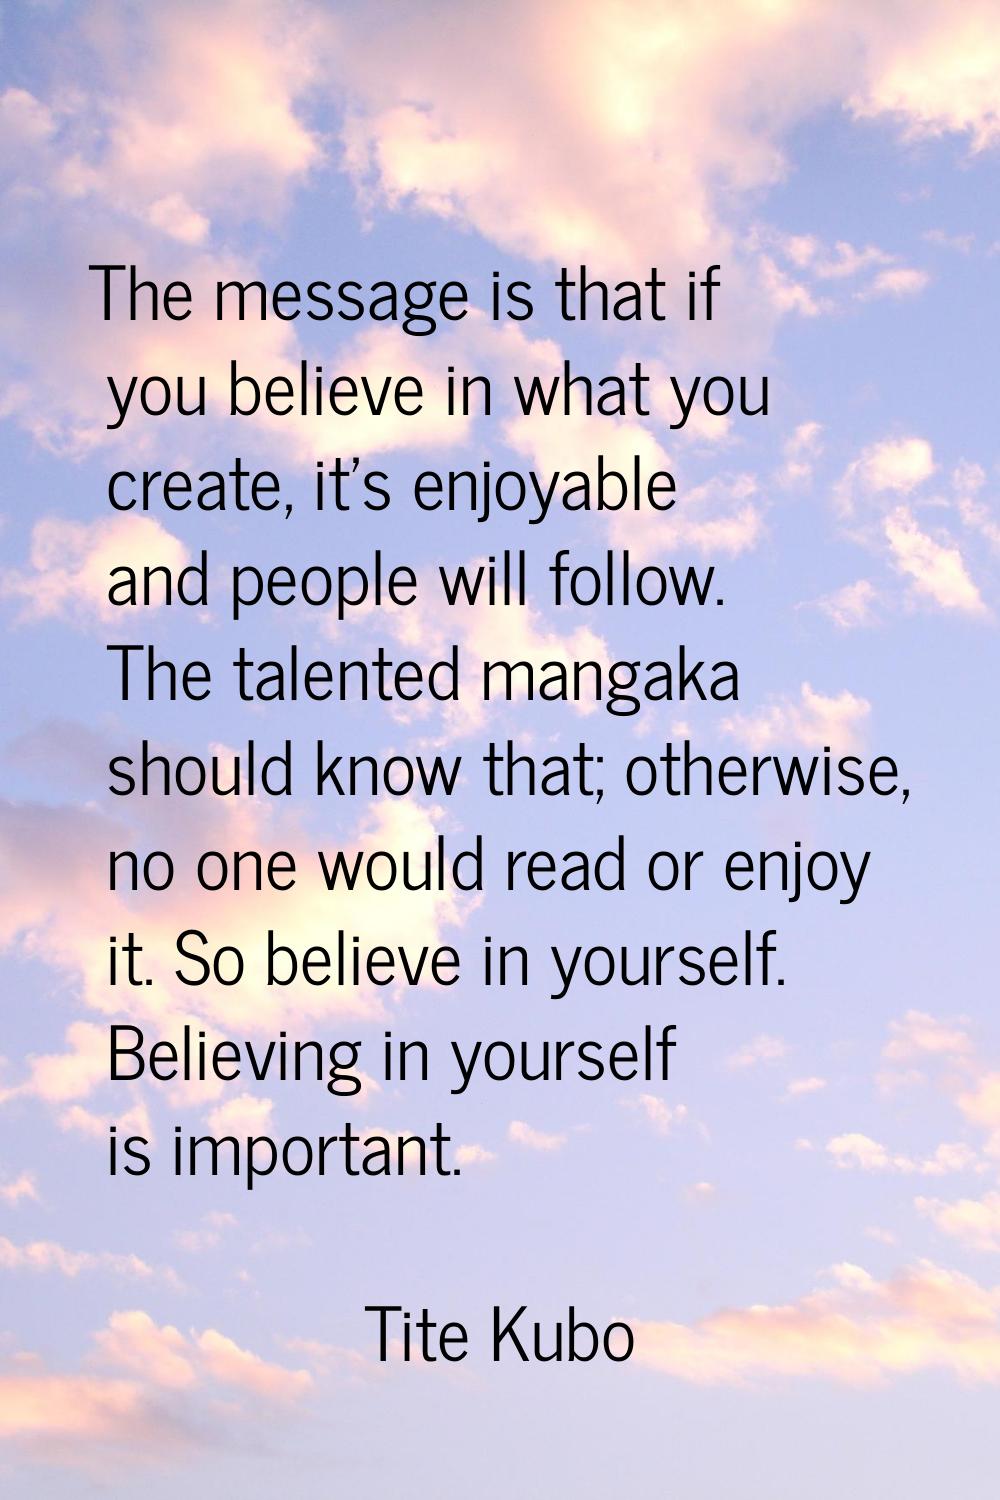 The message is that if you believe in what you create, it's enjoyable and people will follow. The t